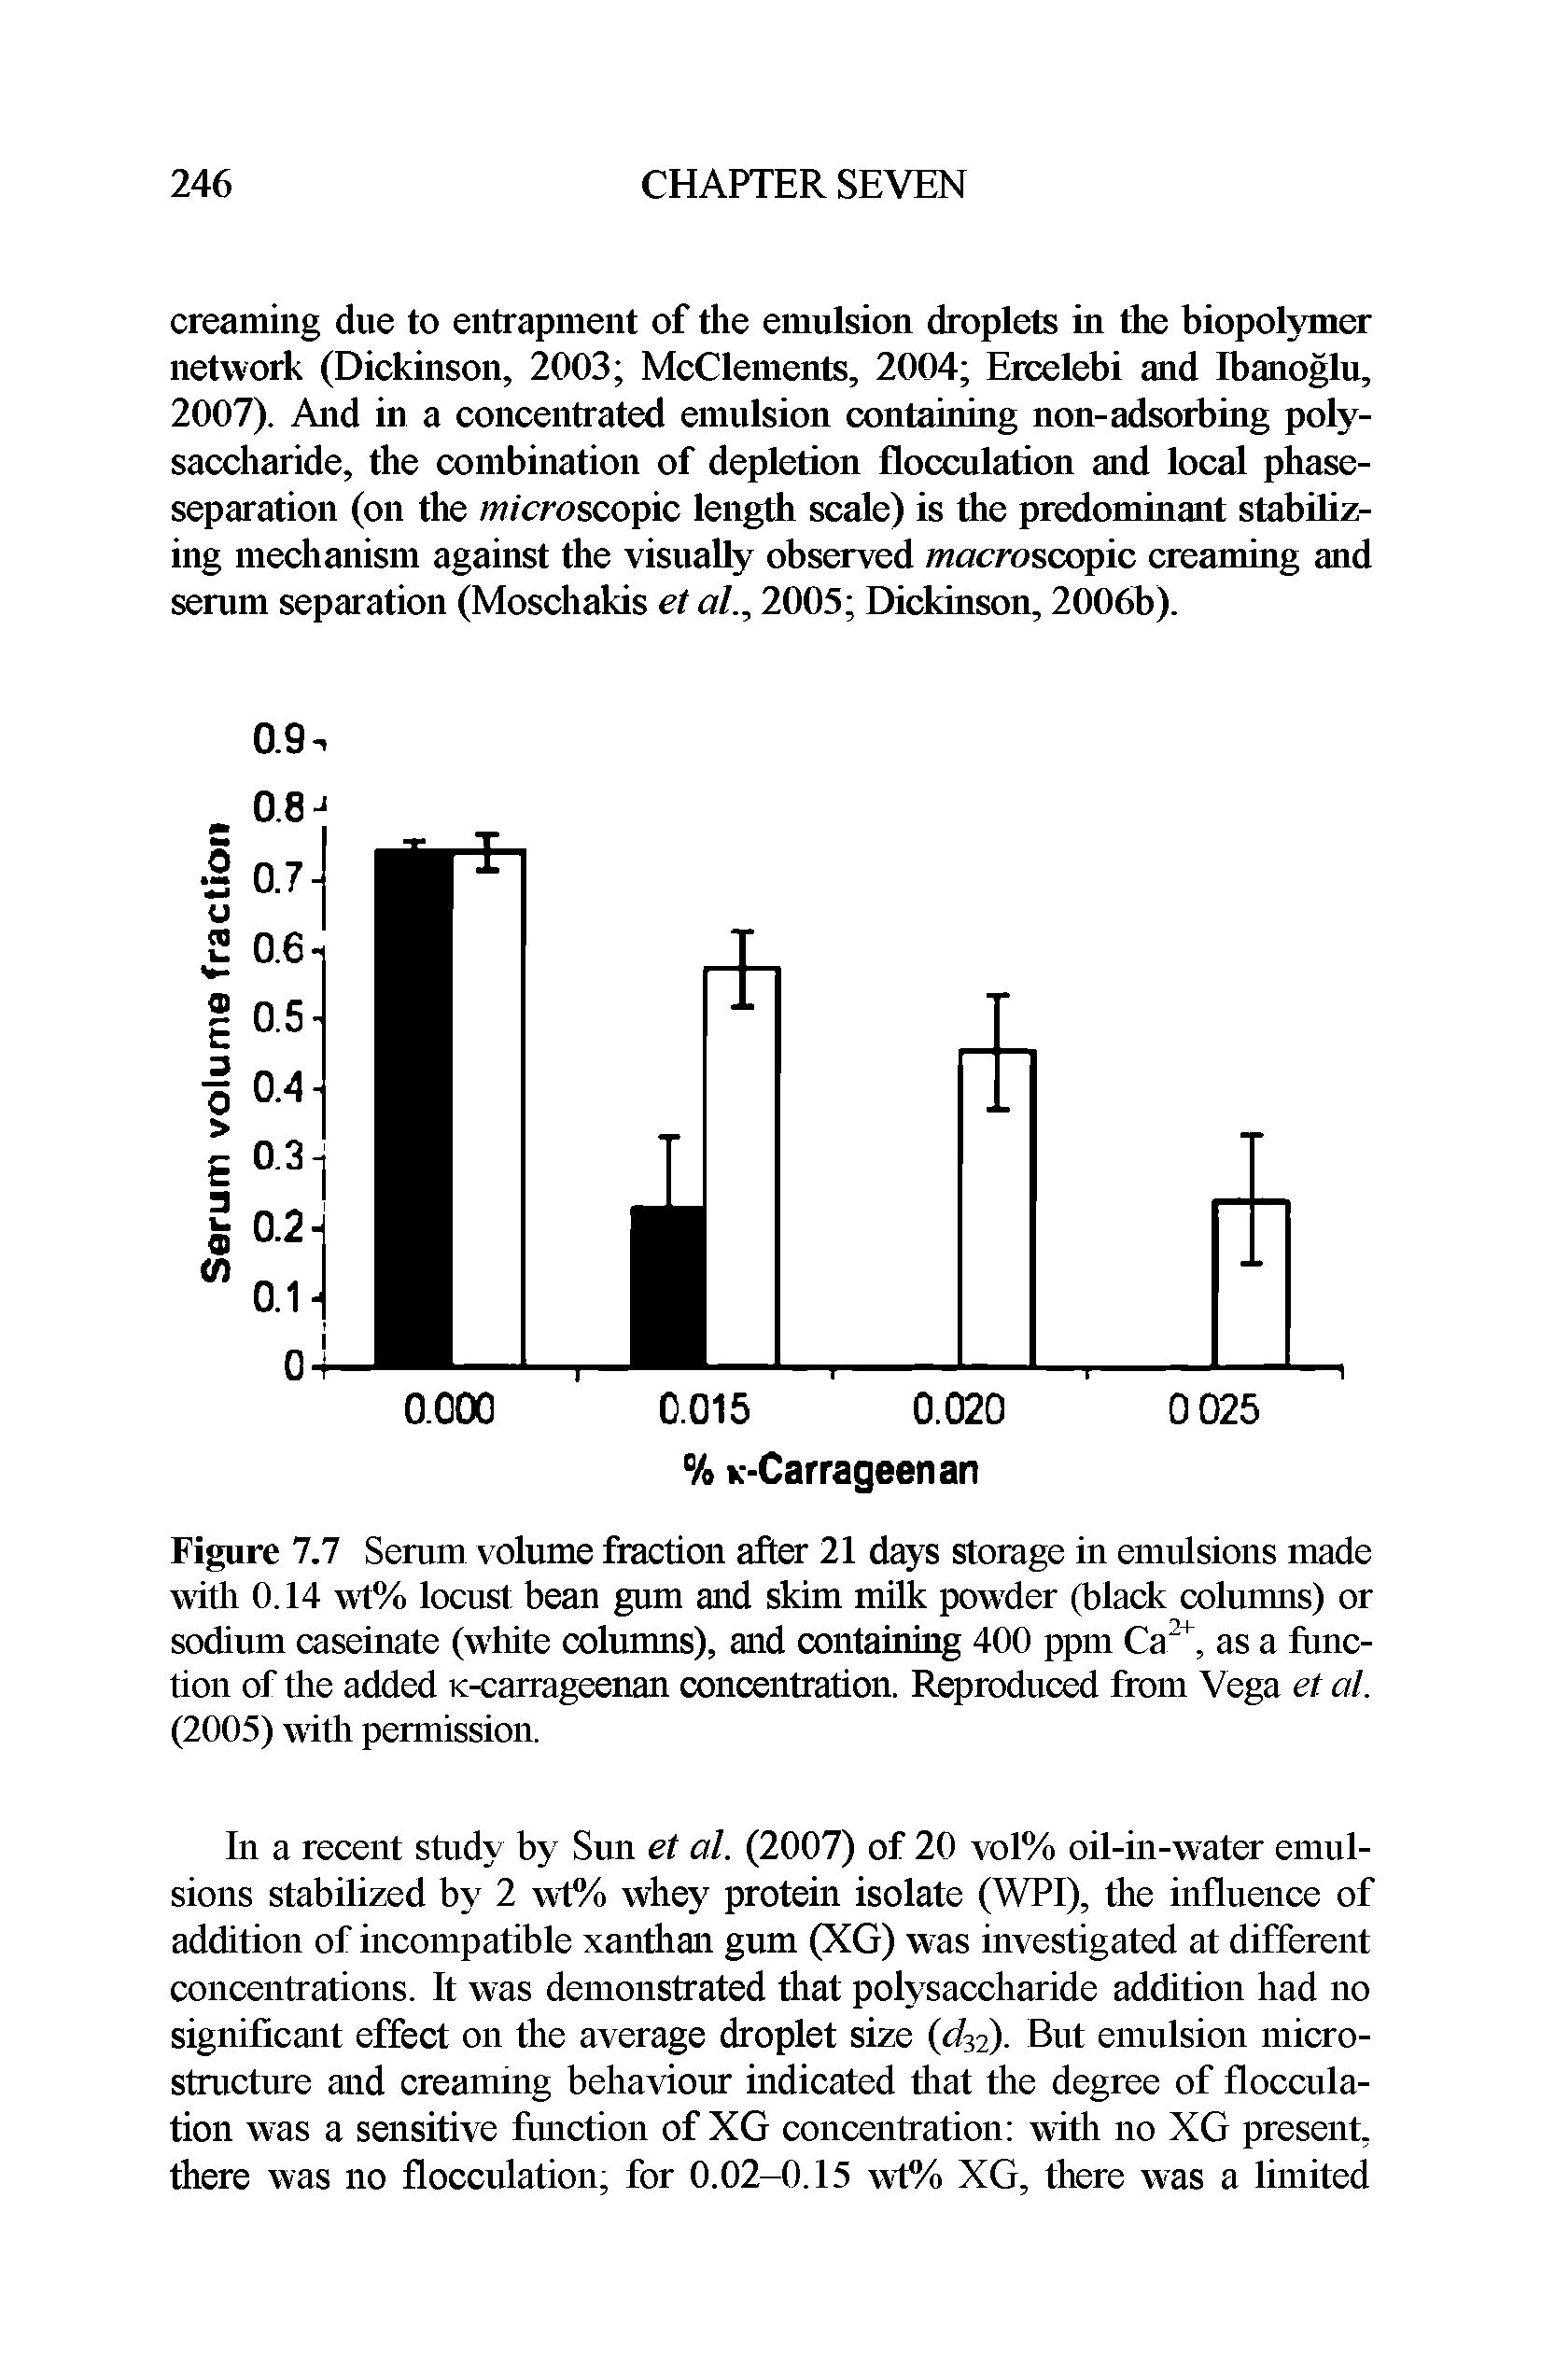 Figure 7.7 Serum volume fraction after 21 days storage in emulsions made with 0.14 wt% locust bean gum and skim milk powder (black columns) or sodium caseinate (white columns), and containing 400 ppm Ca2+, as a function of the added K-carrageenan concentration. Reproduced from Vega et al. (2005) with permission.